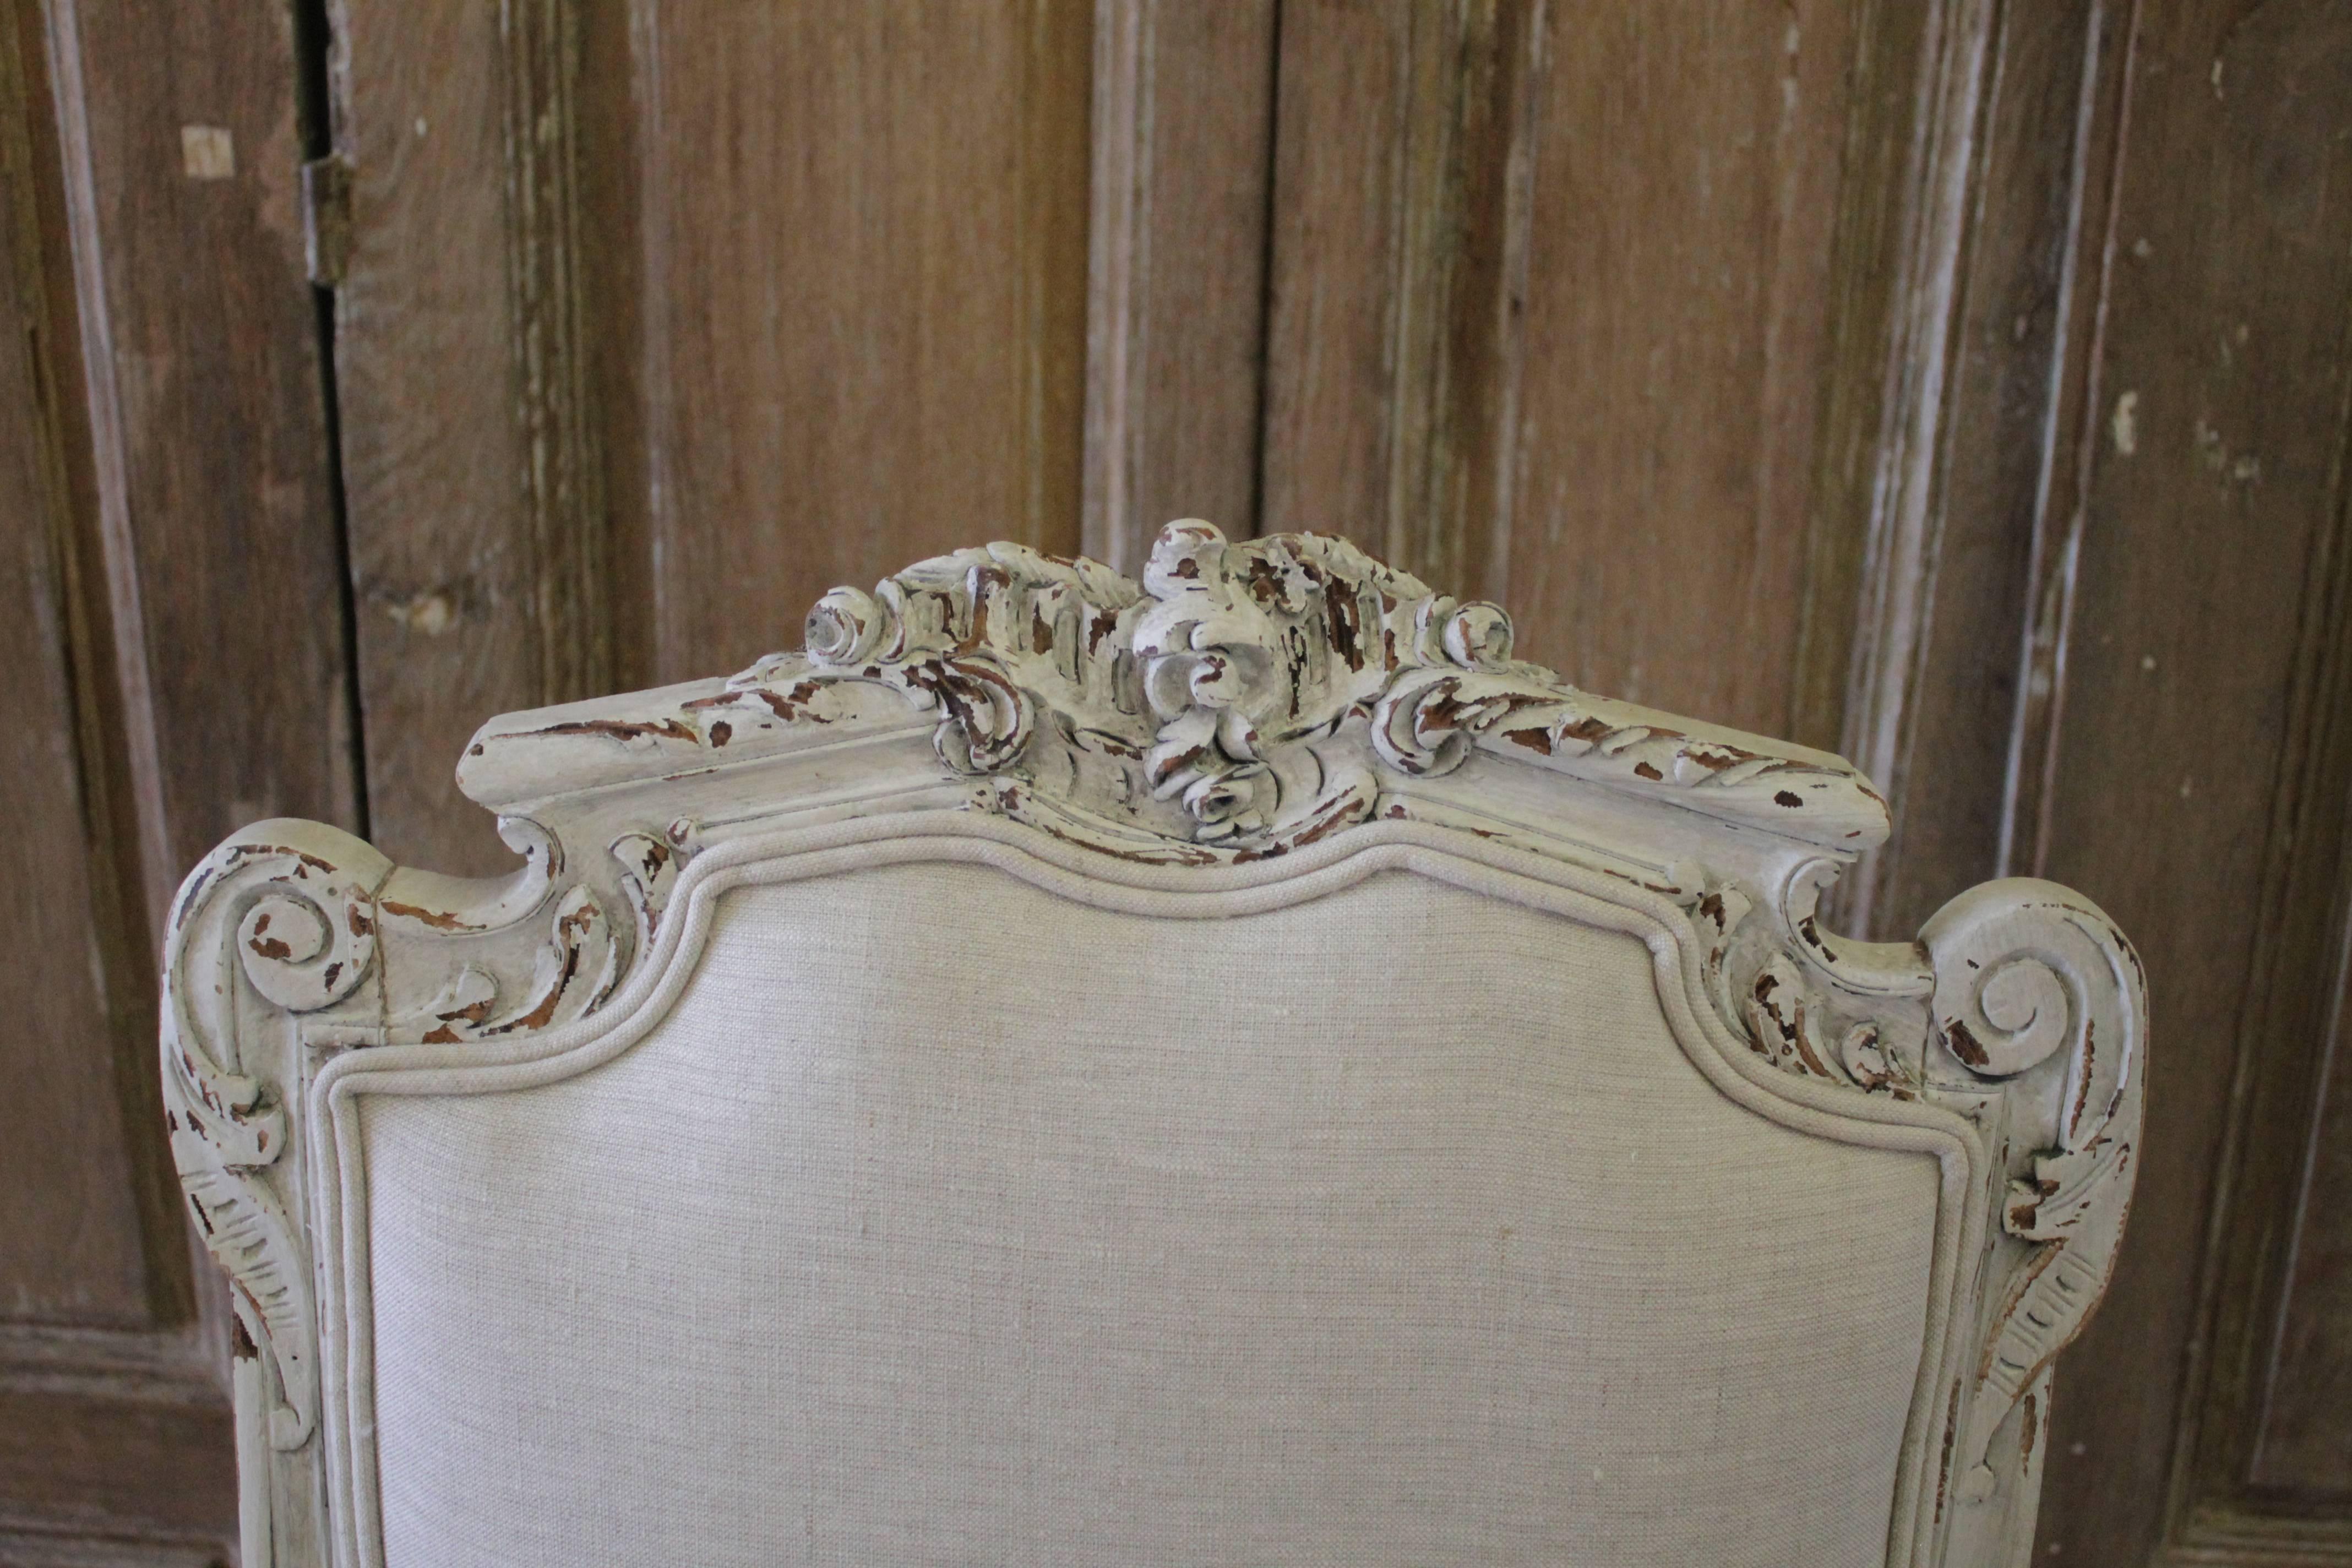 19th century antique carved and painted Rococo style vanity chairs in linen.
Painted in our oyster white, with subtle distressed edges, and finished with an antique patina. The paint color is not white, but rather a 